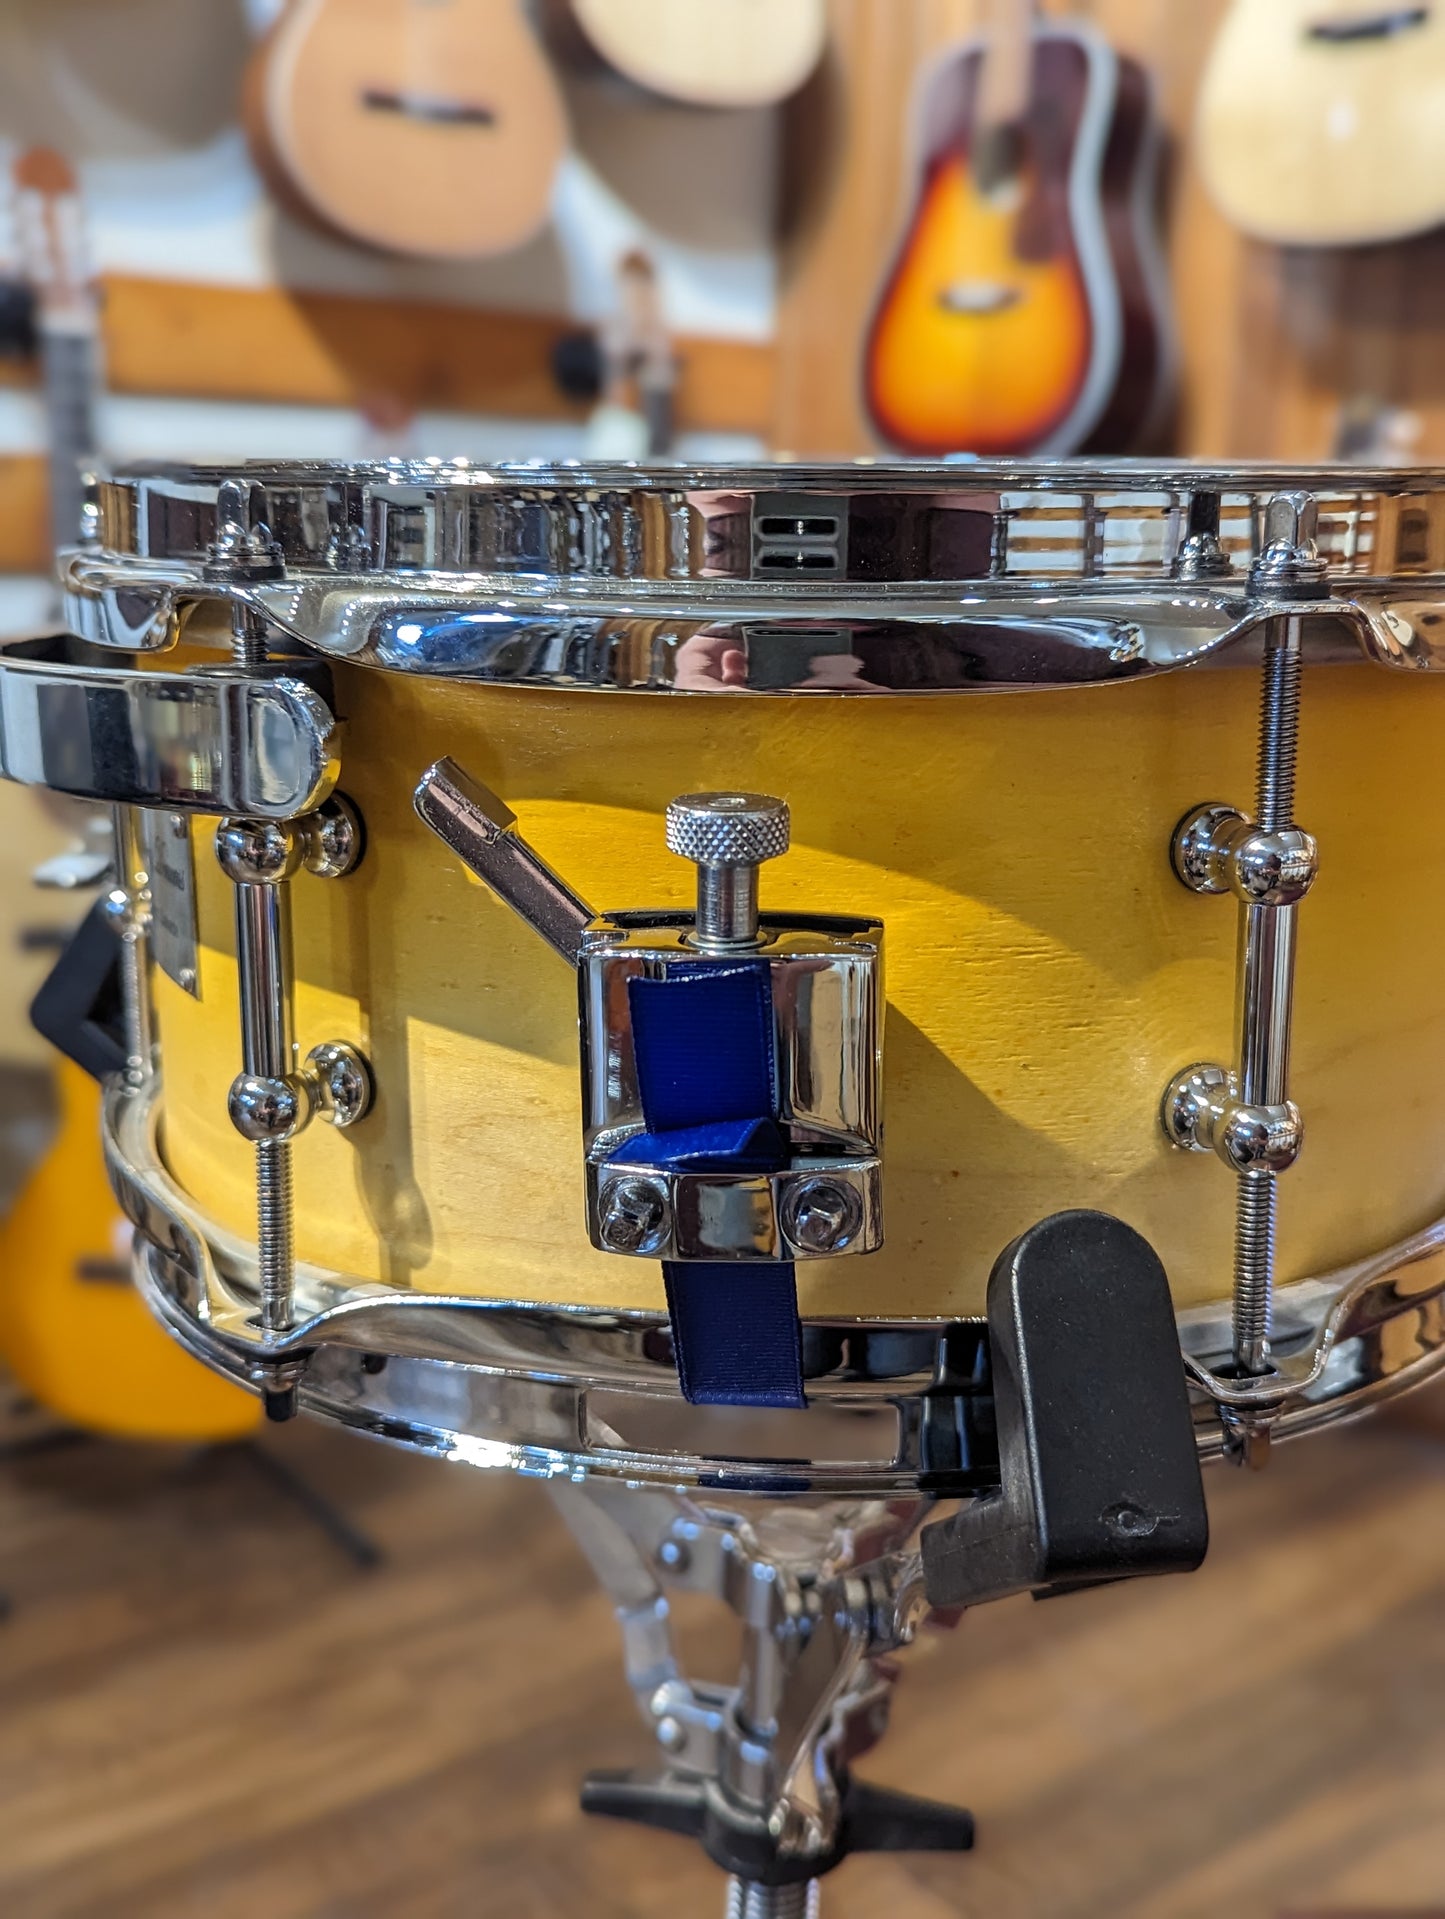 Odyssey Drums 10"x5" 6 Ply Maple Snare w/Mounting Hardware - Yellow Fade